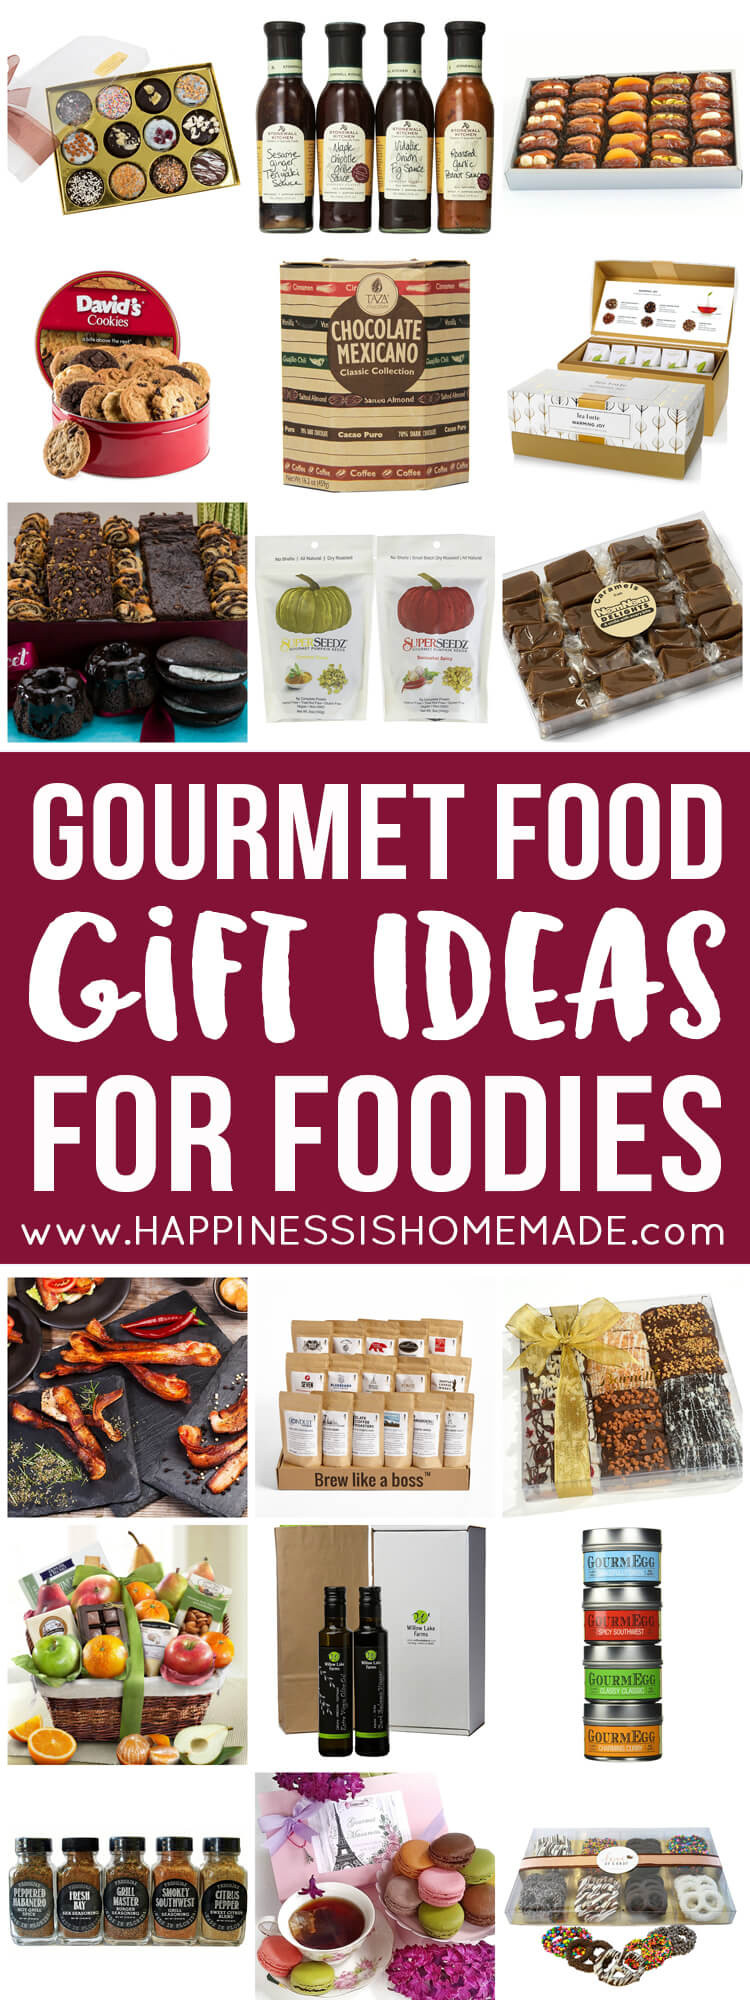 Gourmet Food Gifts
 Gourmet Food Gift Ideas for Foo s Happiness is Homemade